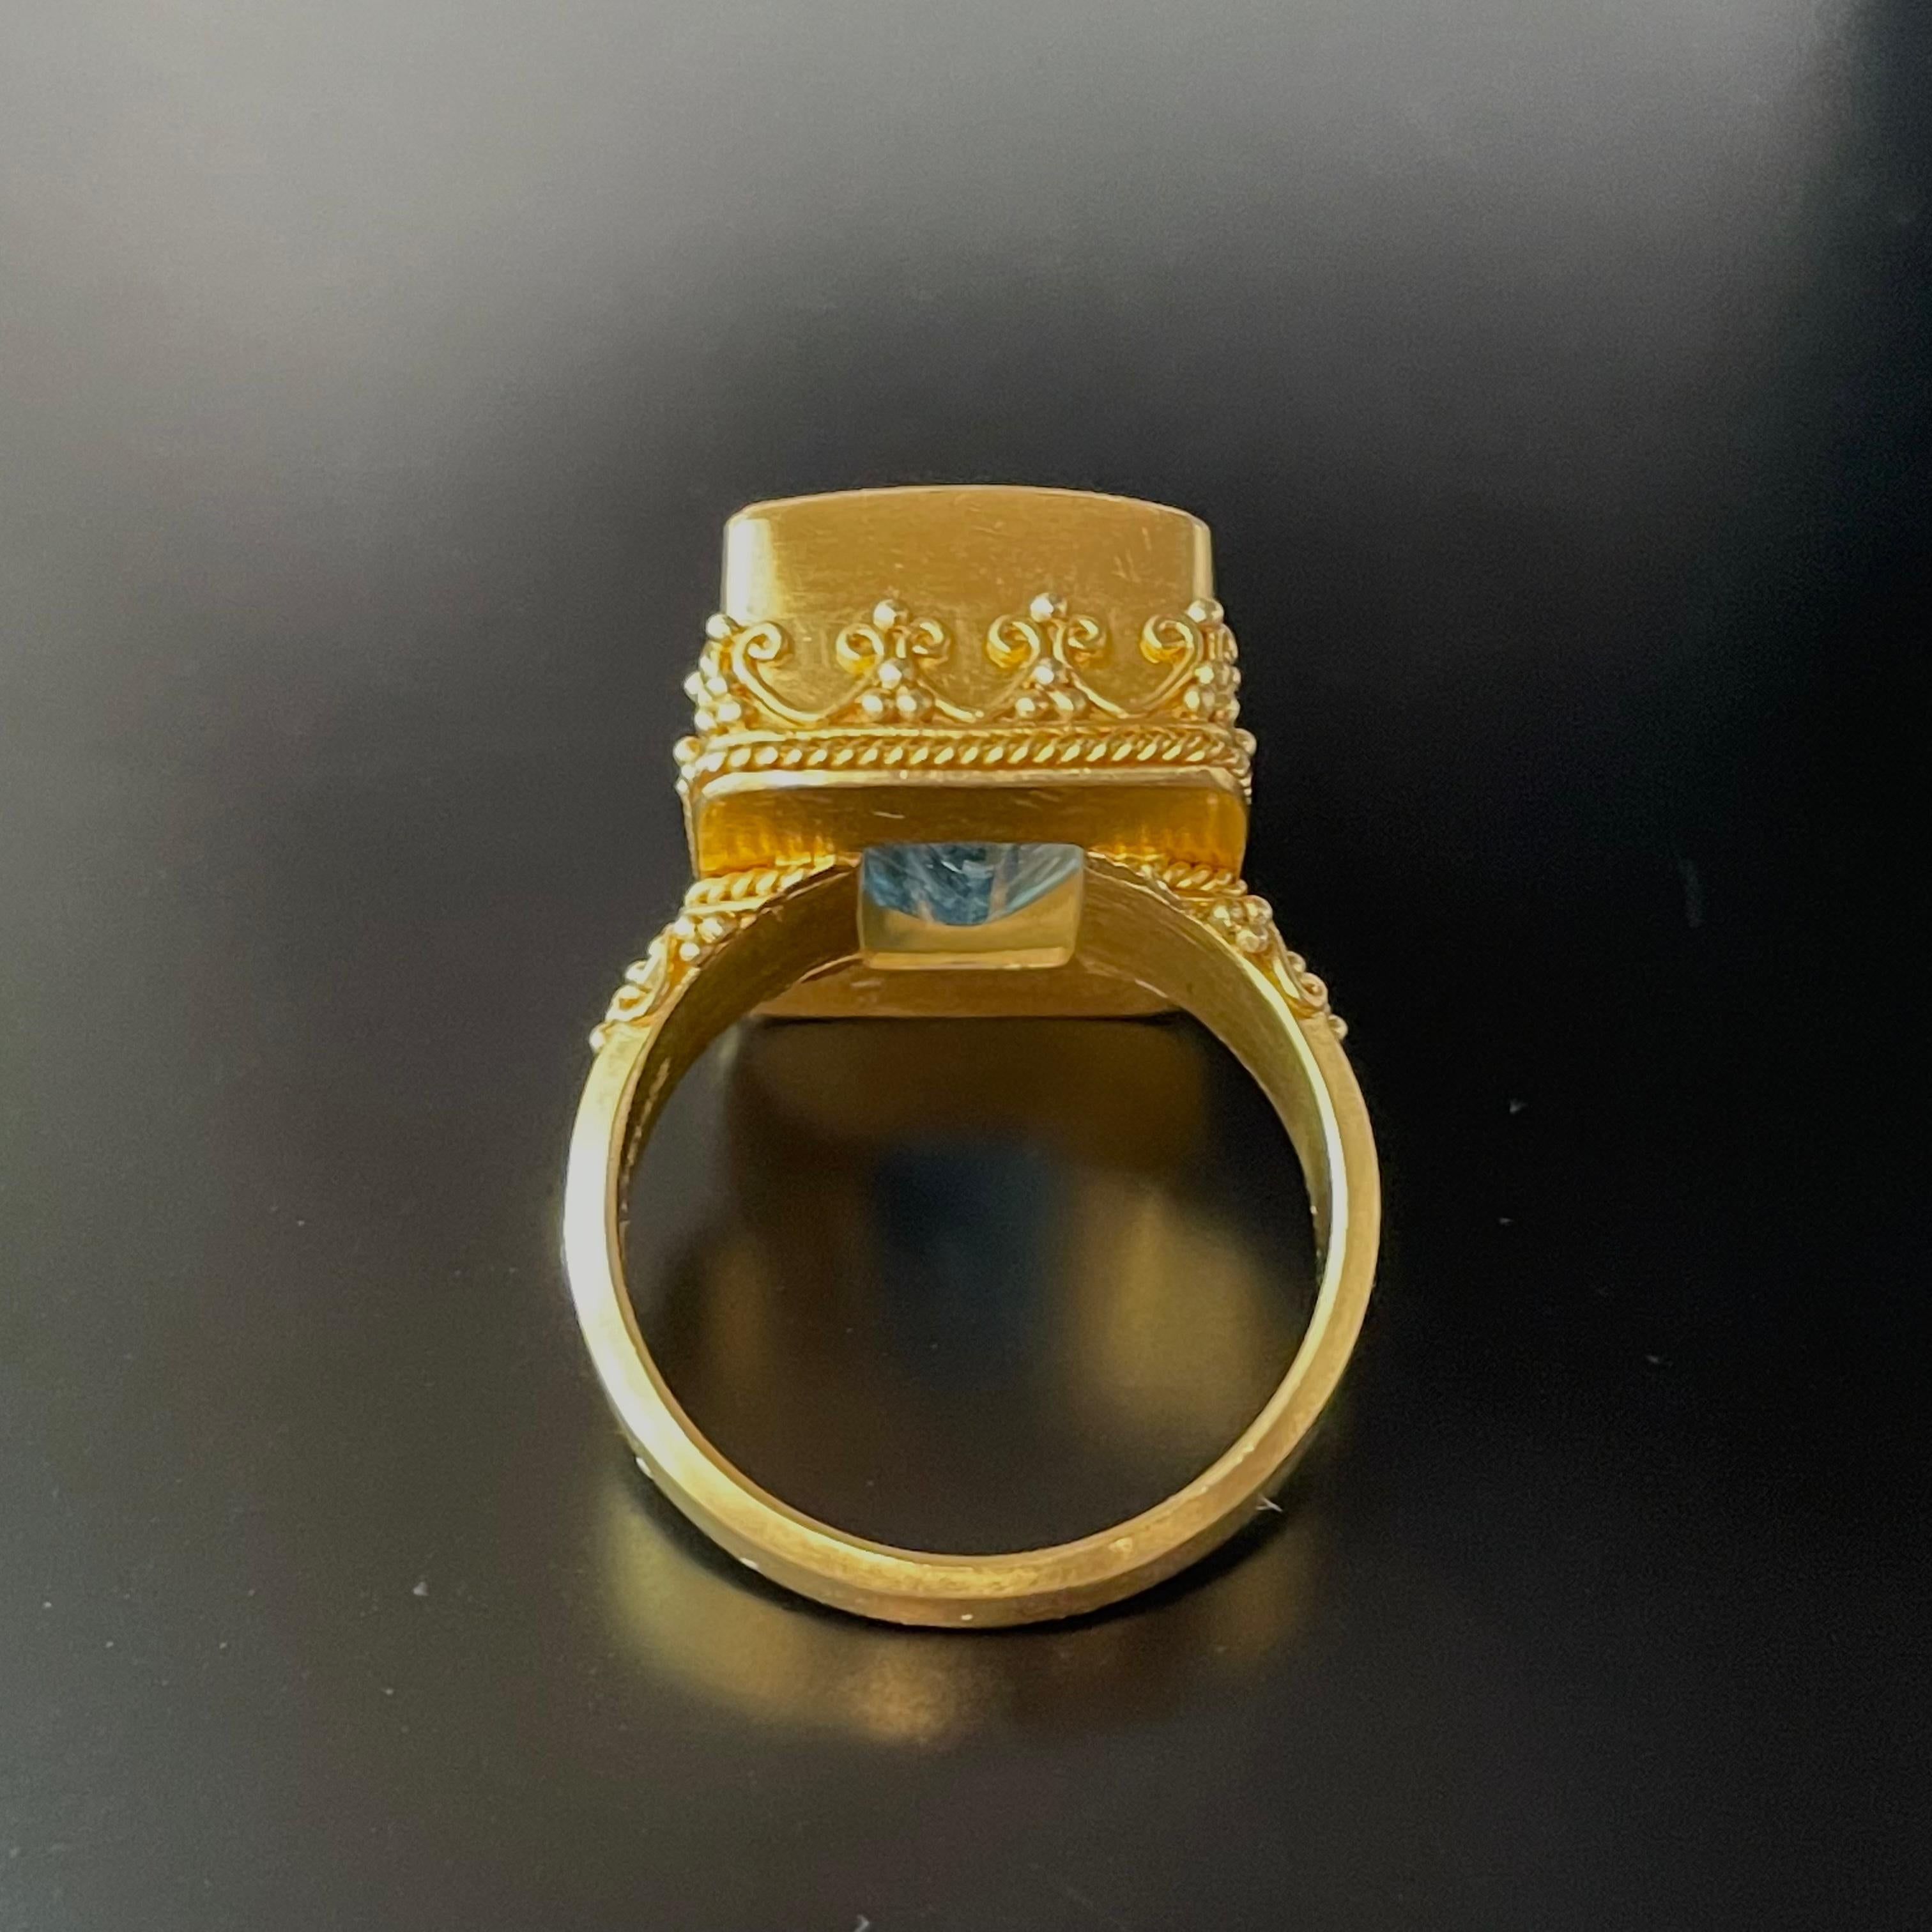 Steven Battelle 11.5 Carats Rectangular Aquamarine Handmade 22K Gold Ring In New Condition For Sale In Soquel, CA